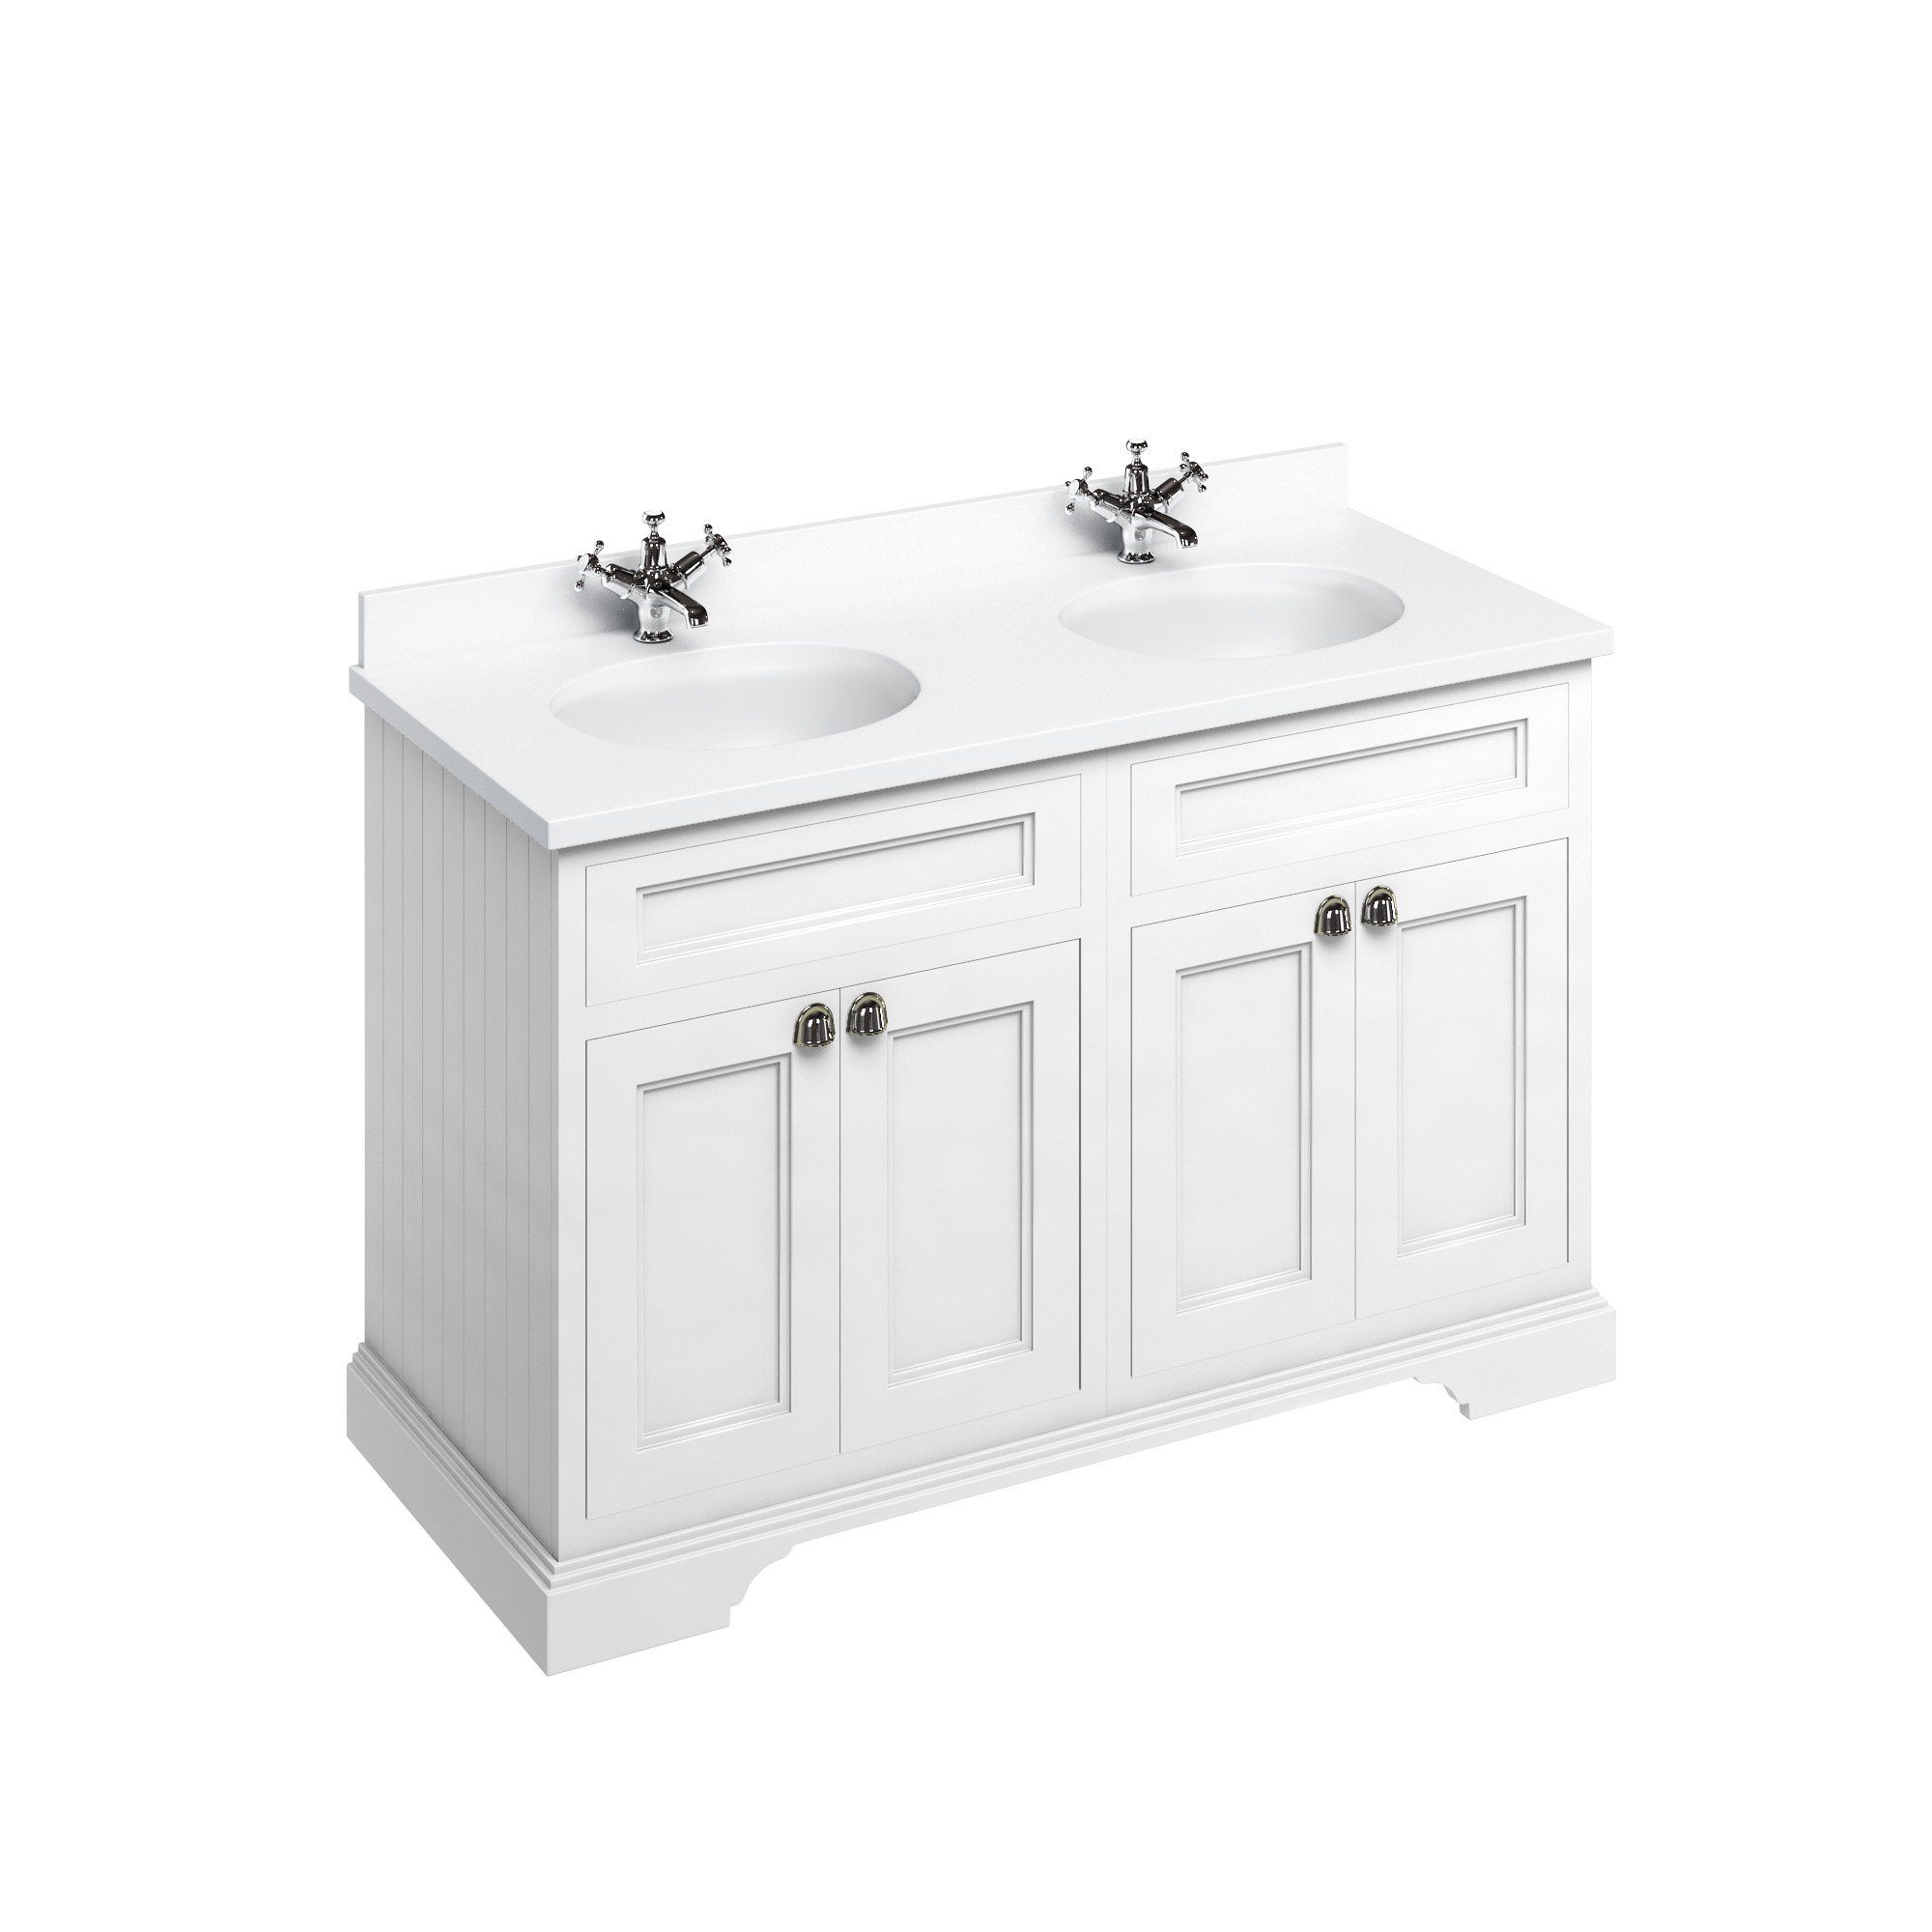 Freestanding 130 Vanity Unit with doors - Matt White and Minerva white worktop with two integrated white basins